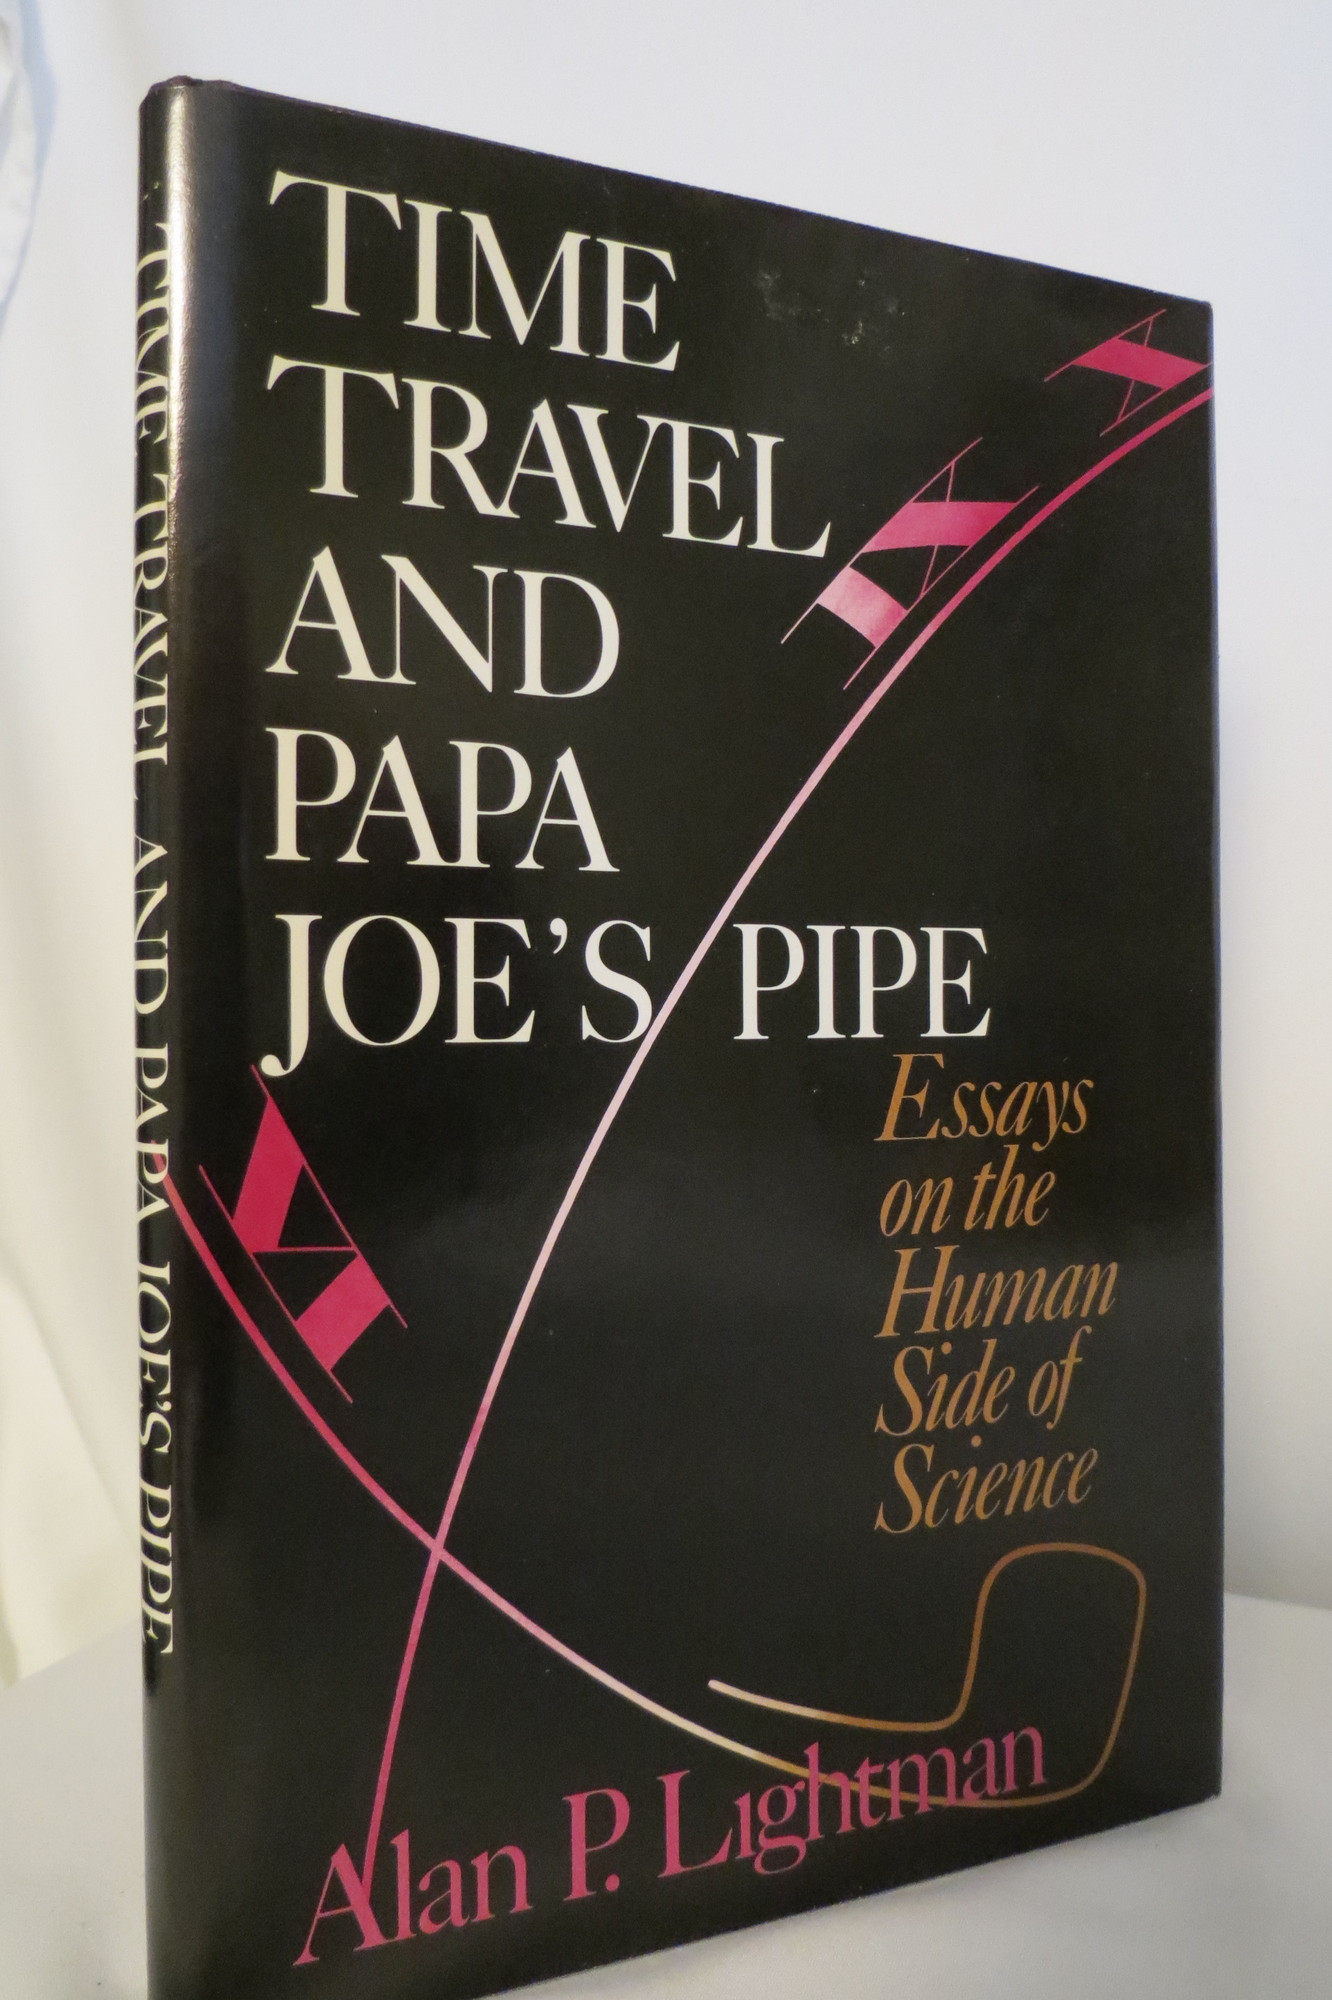 Image for TIME TRAVEL AND PAPA JOE'S PIPE  (DJ protected by clear, acid-free mylar cover)